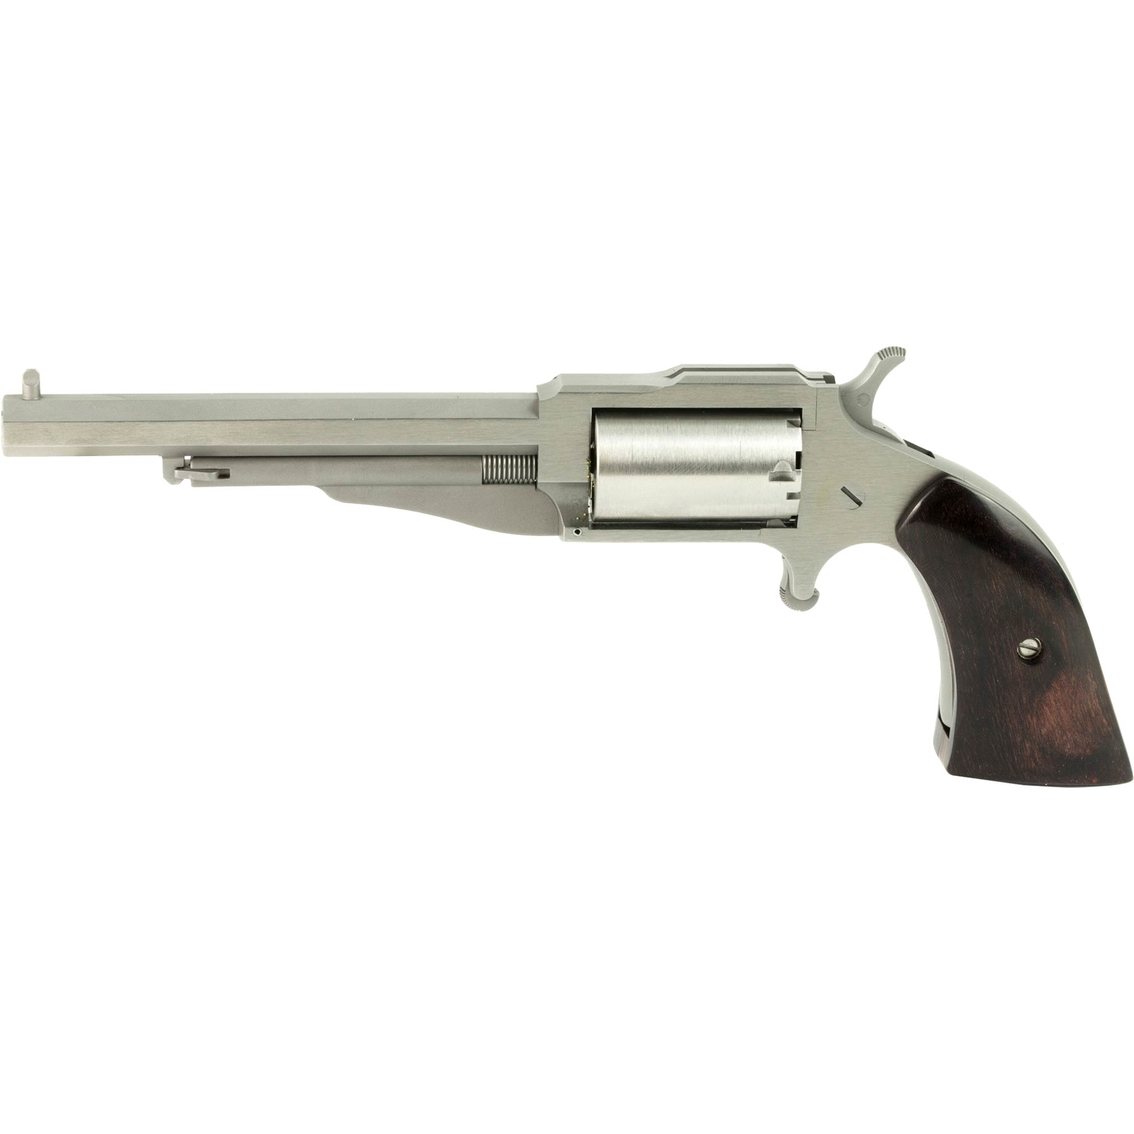 NAA Mini Revolver 22 WMR 4 in. Barrel 5 Rds Revolver Stainless Steel - Image 2 of 3